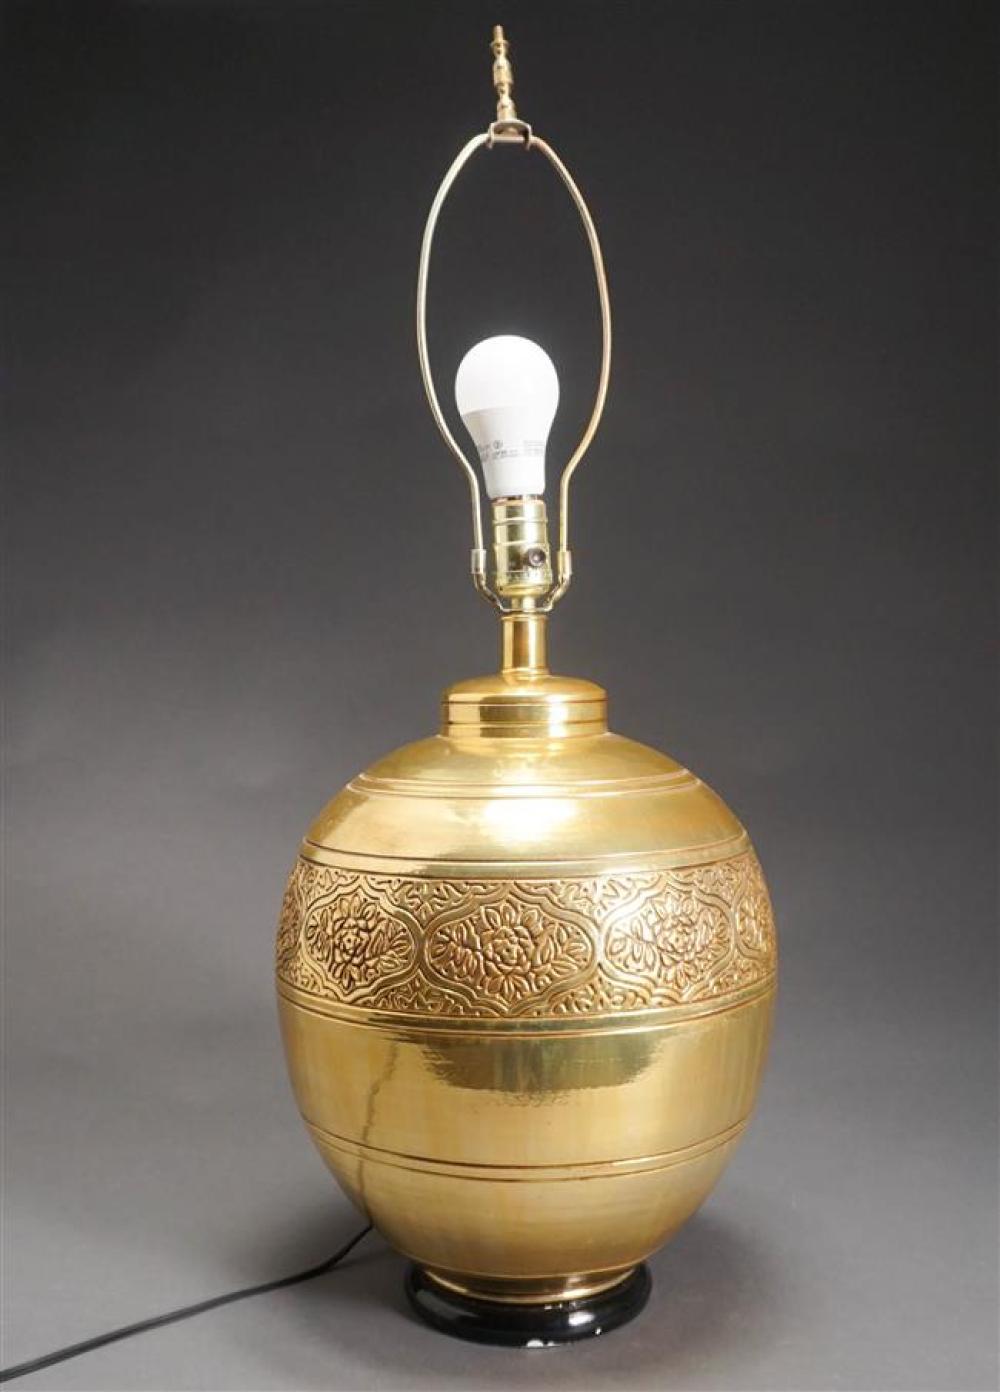 MIDDLE EASTERN STYLE GOLD CERAMIC